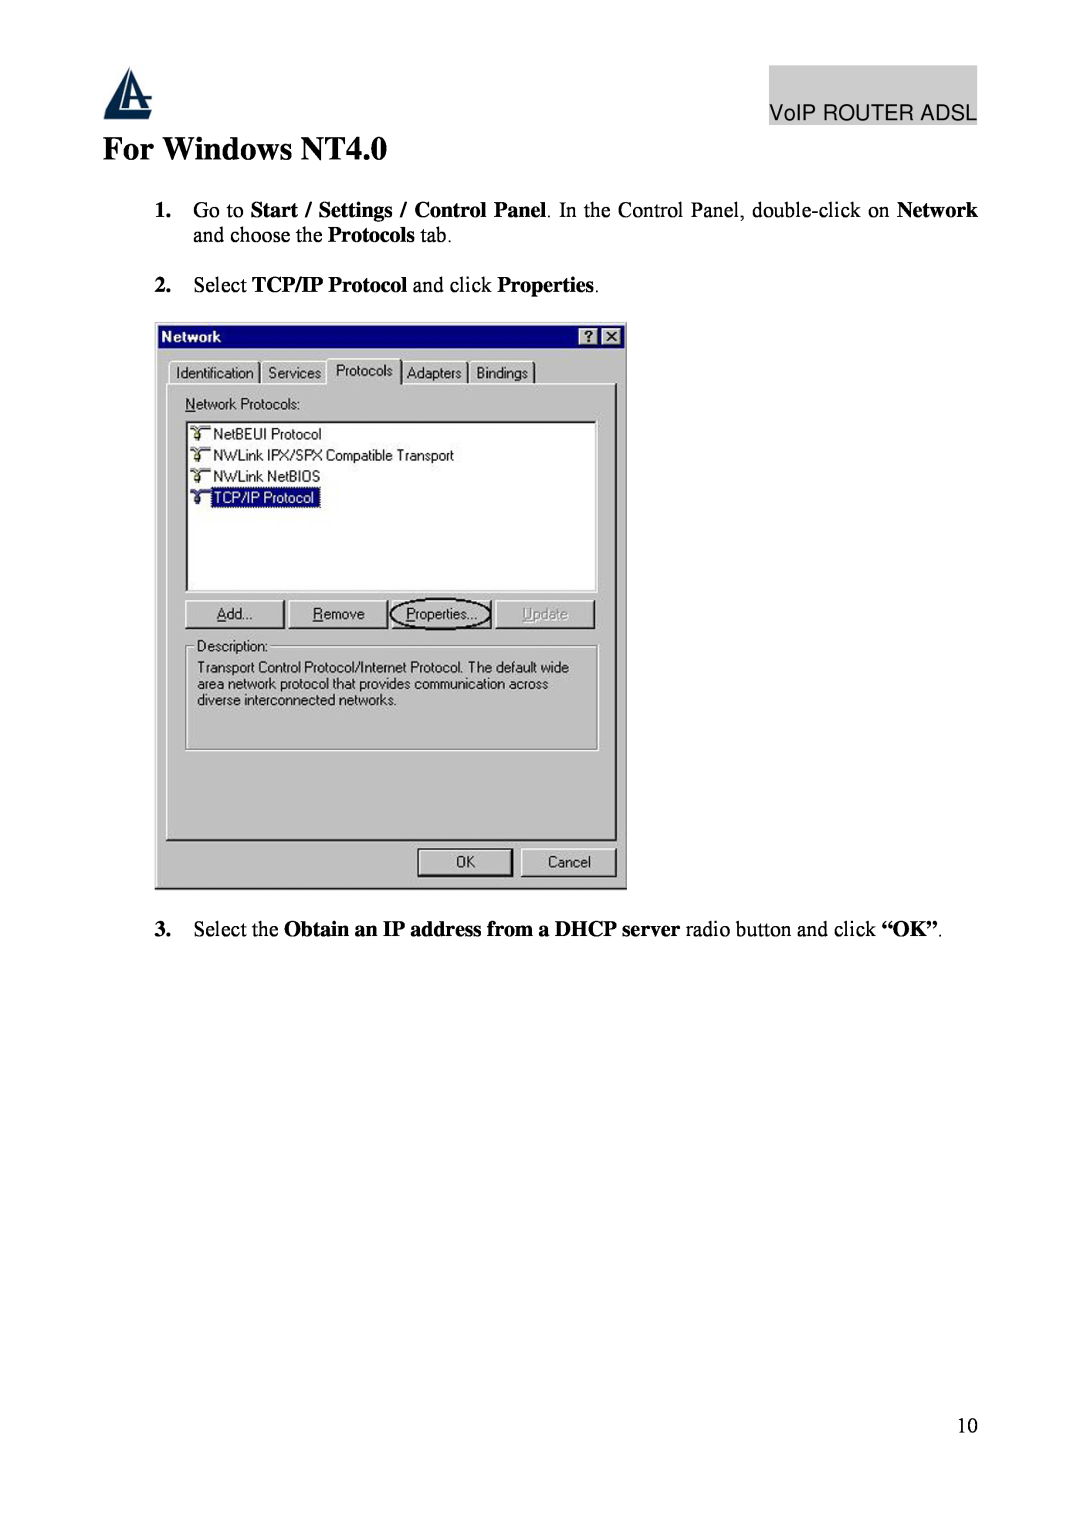 Atlantis Land A02-RAV211 manual For Windows NT4.0, Select TCP/IP Protocol and click Properties, VoIP ROUTER ADSL 